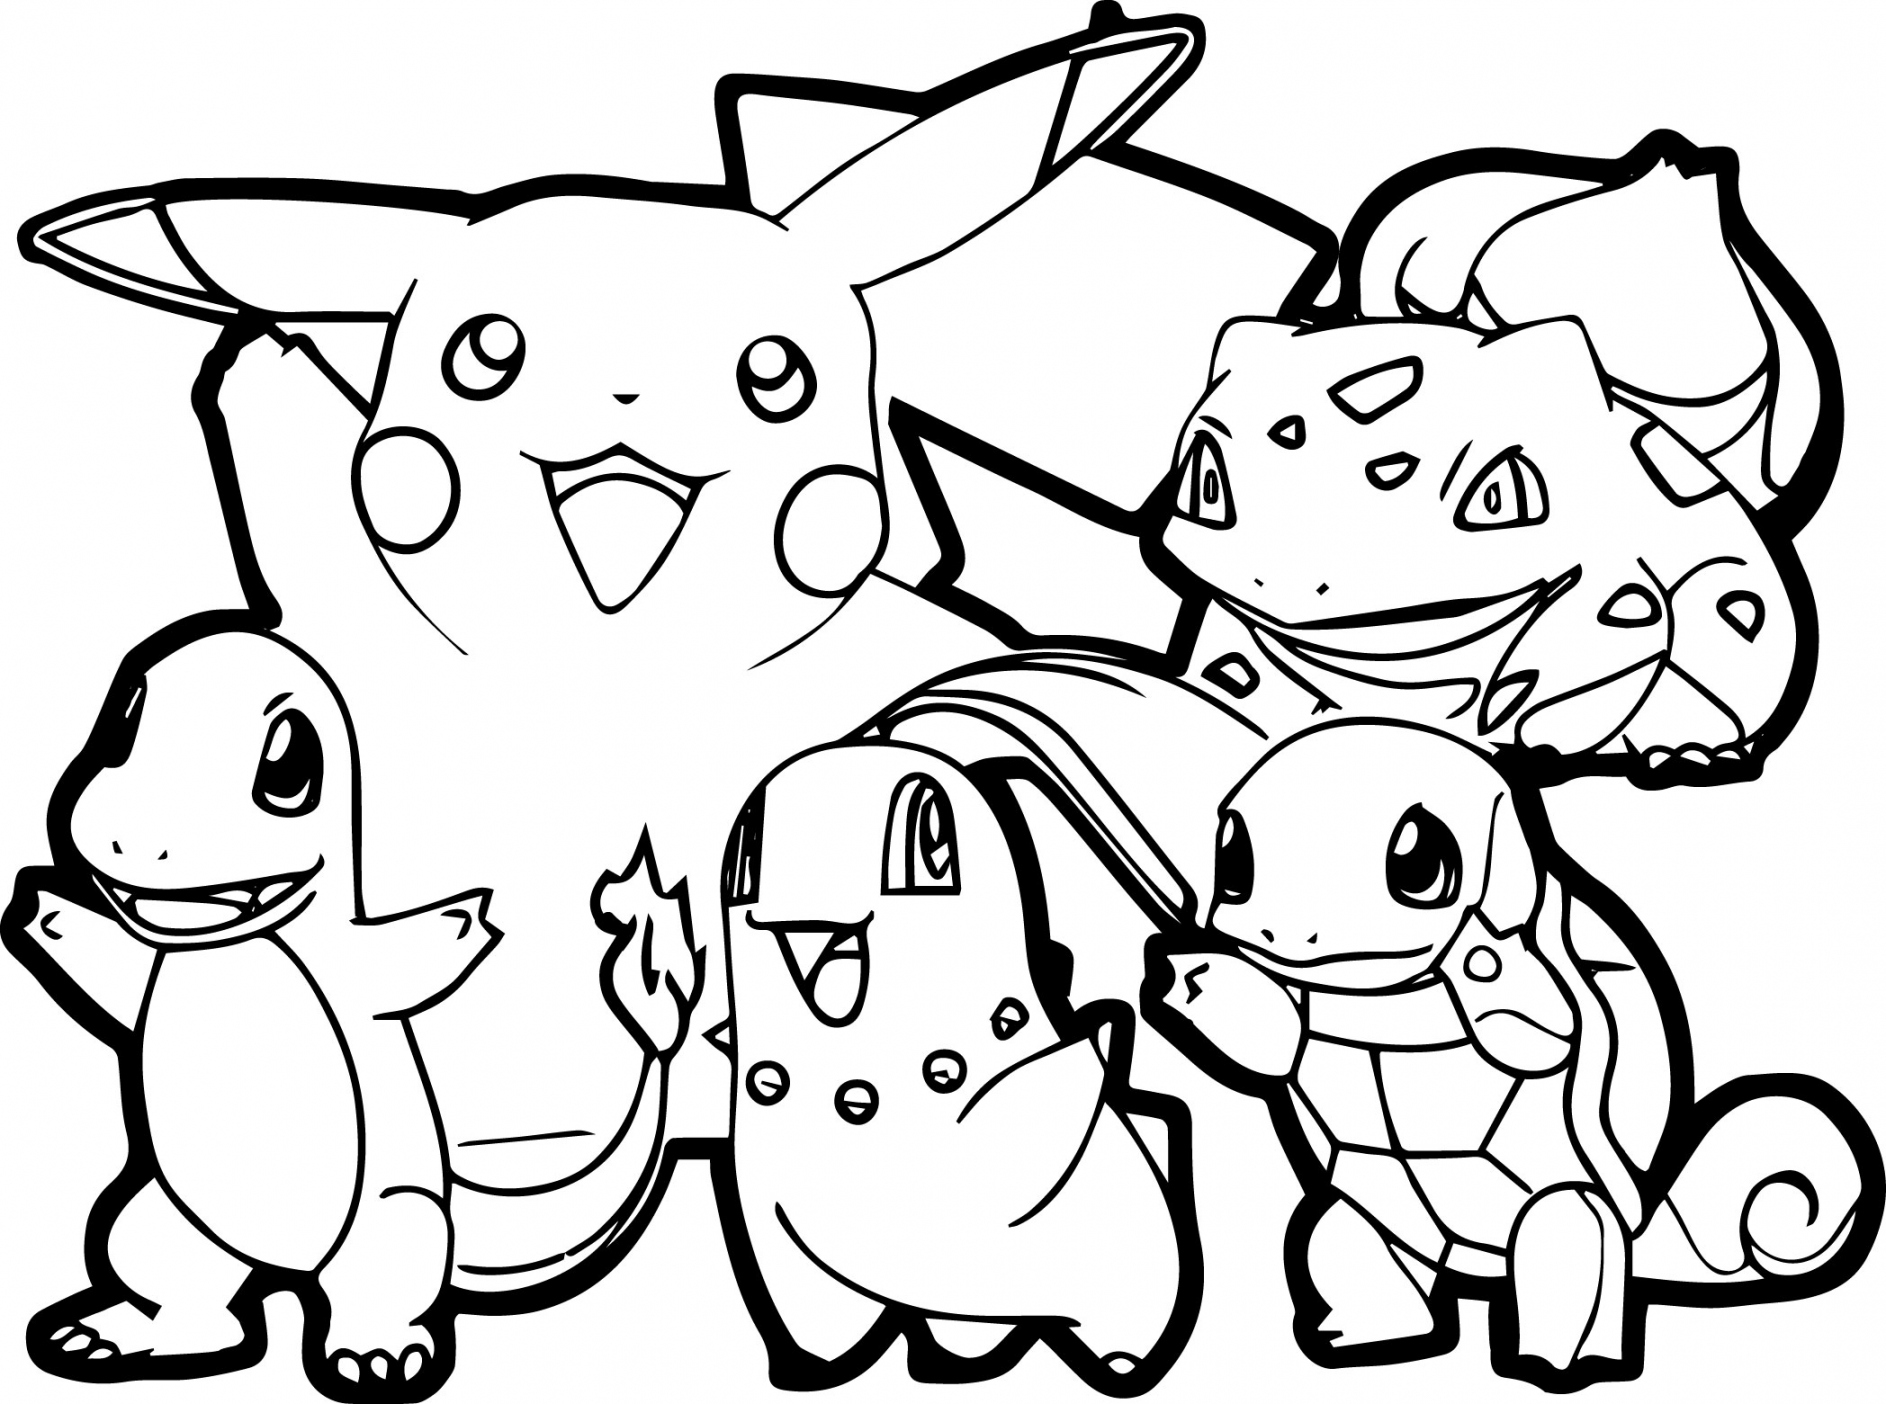 Free Pokemon Coloring Pages Printable - Printable - Pokemon for children - All Pokemon coloring pages Kids Coloring Pages